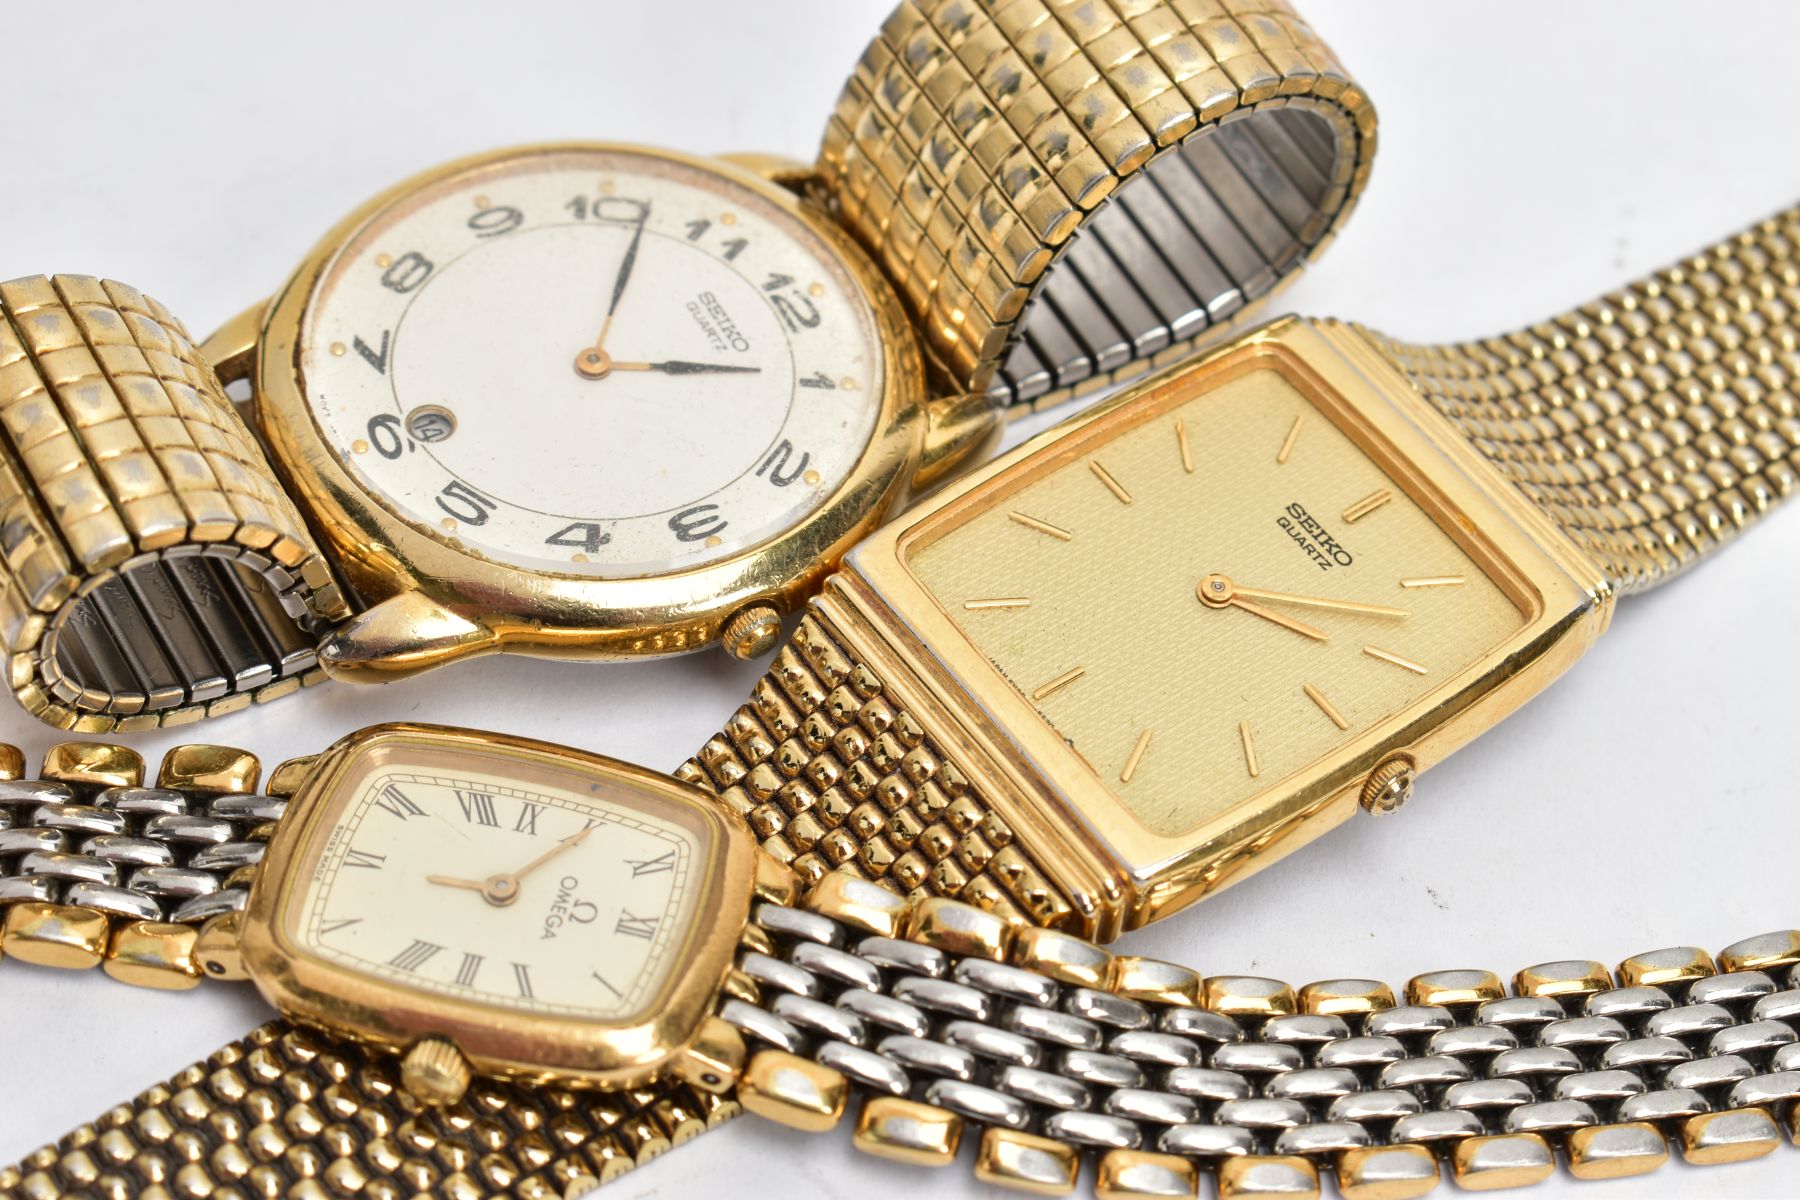 A LADIES 'OMEGA' WRISTWATCH AND TWO GENTS 'SEIKO' WRISTWATCHES, the ladies watch with a rounded - Image 4 of 4